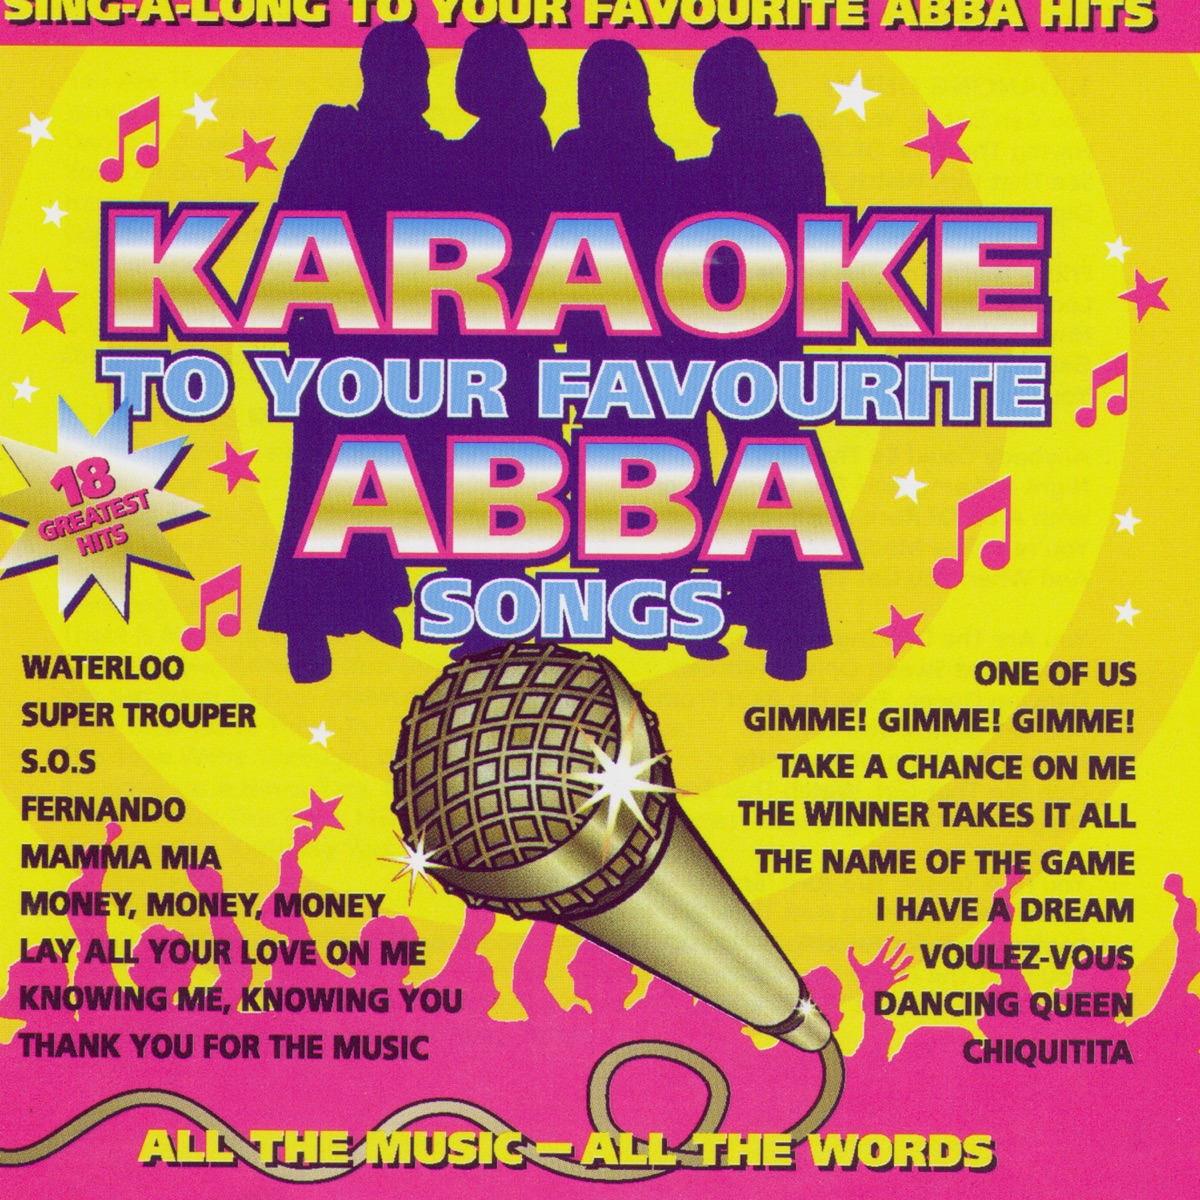 Songs from Mamma Mia: Karaoke - Album by Stage Stars Records - Apple Music